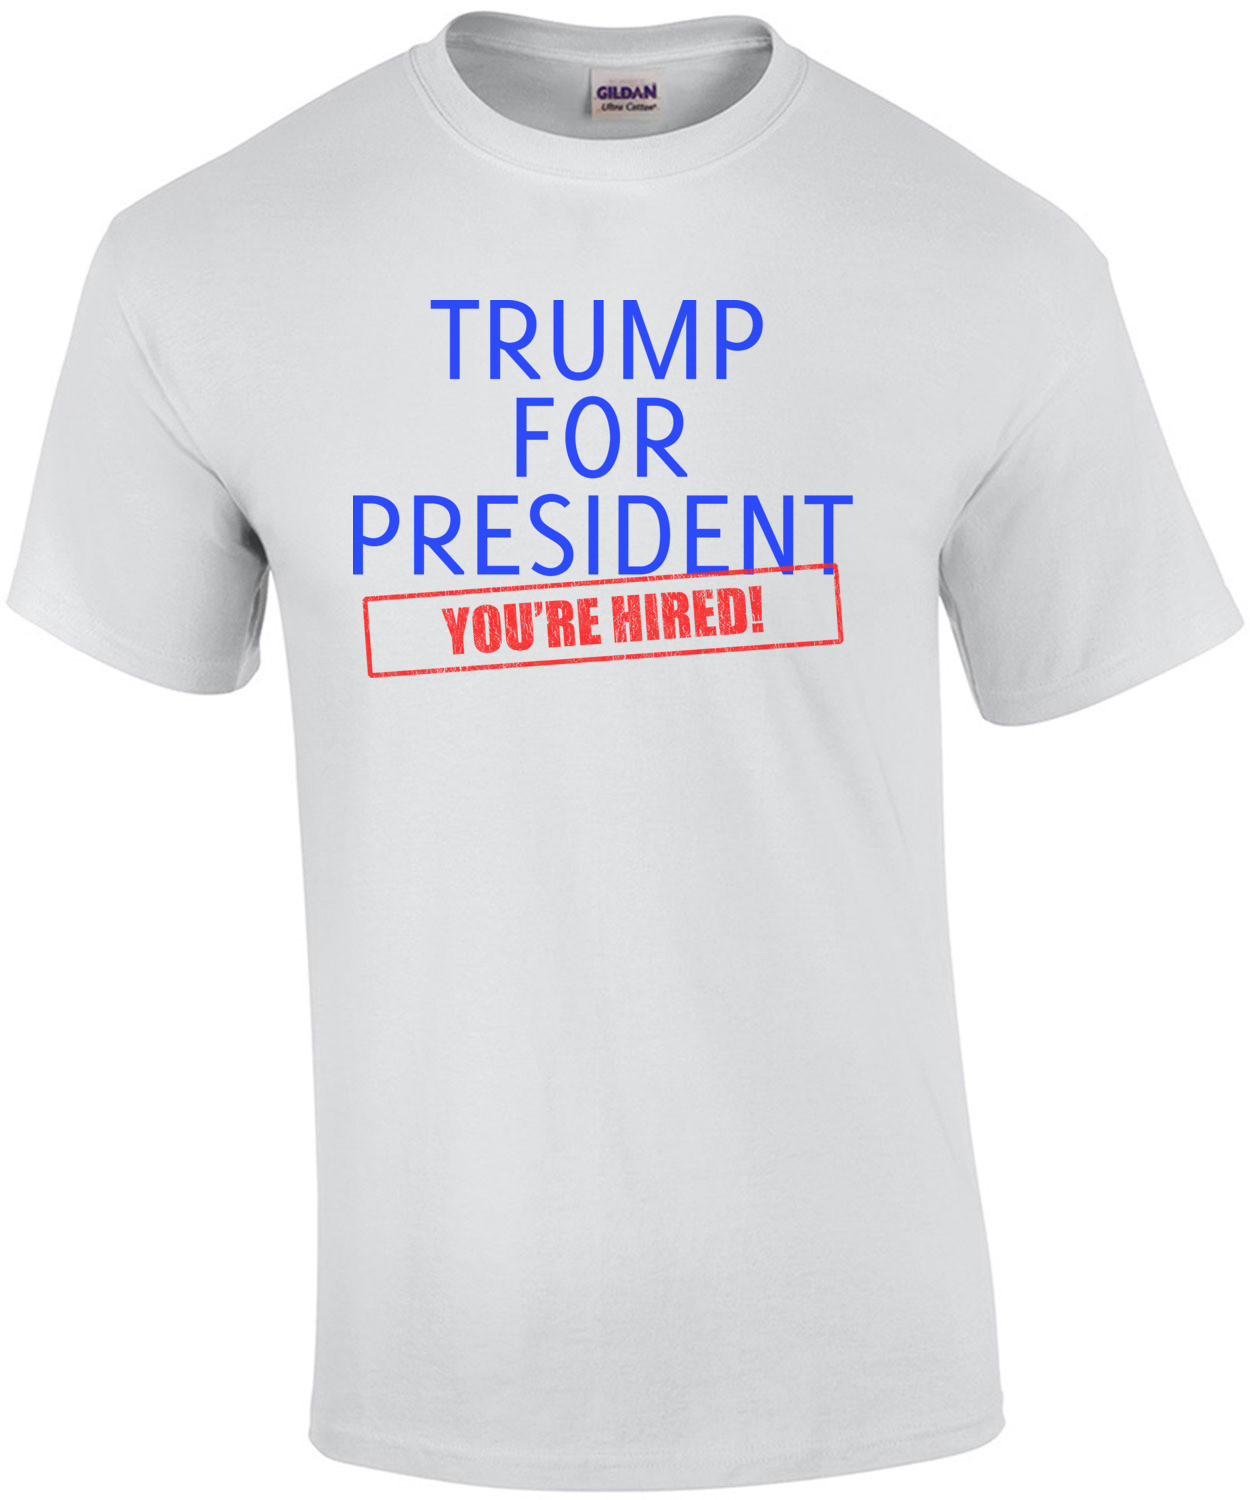 Trump For President - You're Hired Donald Trump T-Shirt